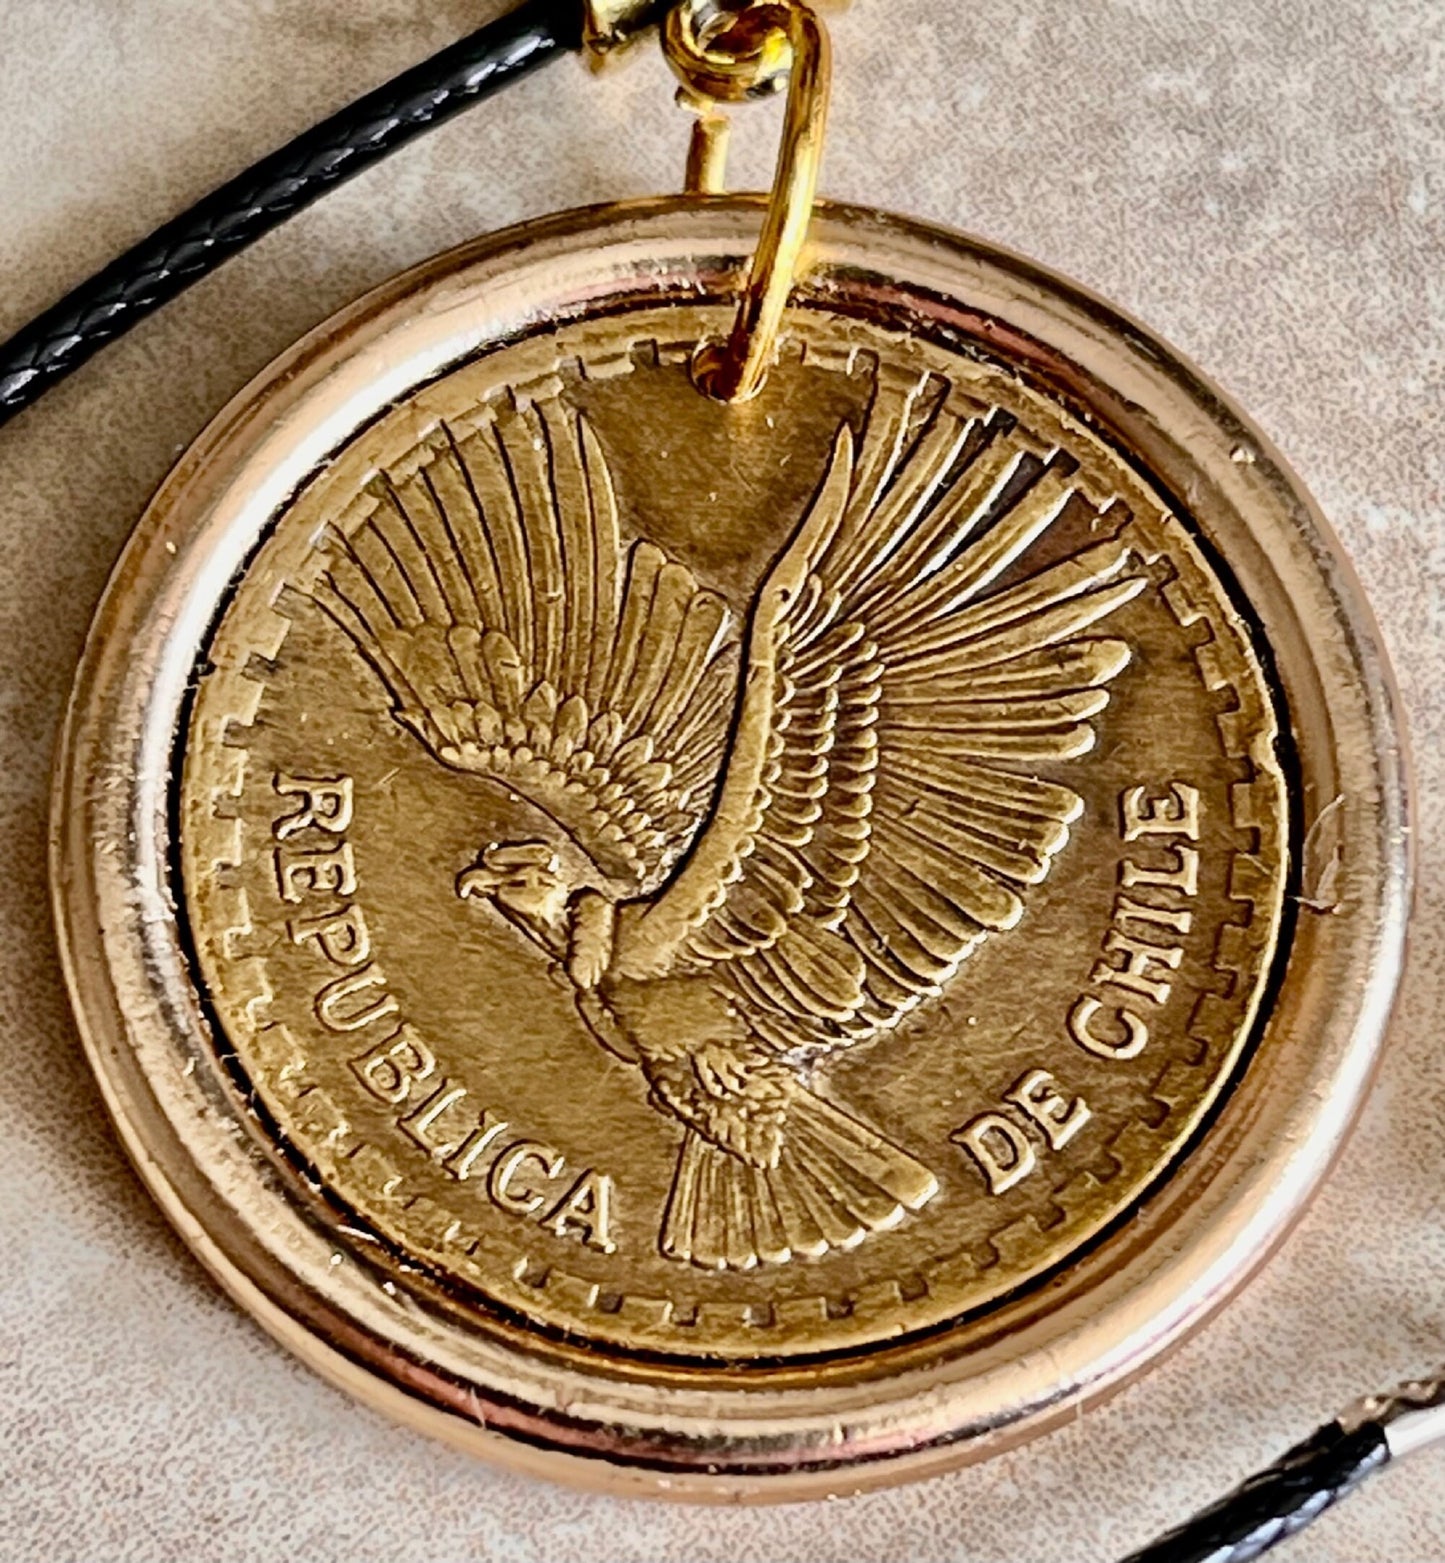 Chile 1965 Coin Pendant Necklace Chillan 10 Centesimos Personal Vintage Handmade Jewelry Gift Friend Charm For Him Her World Coin Collector